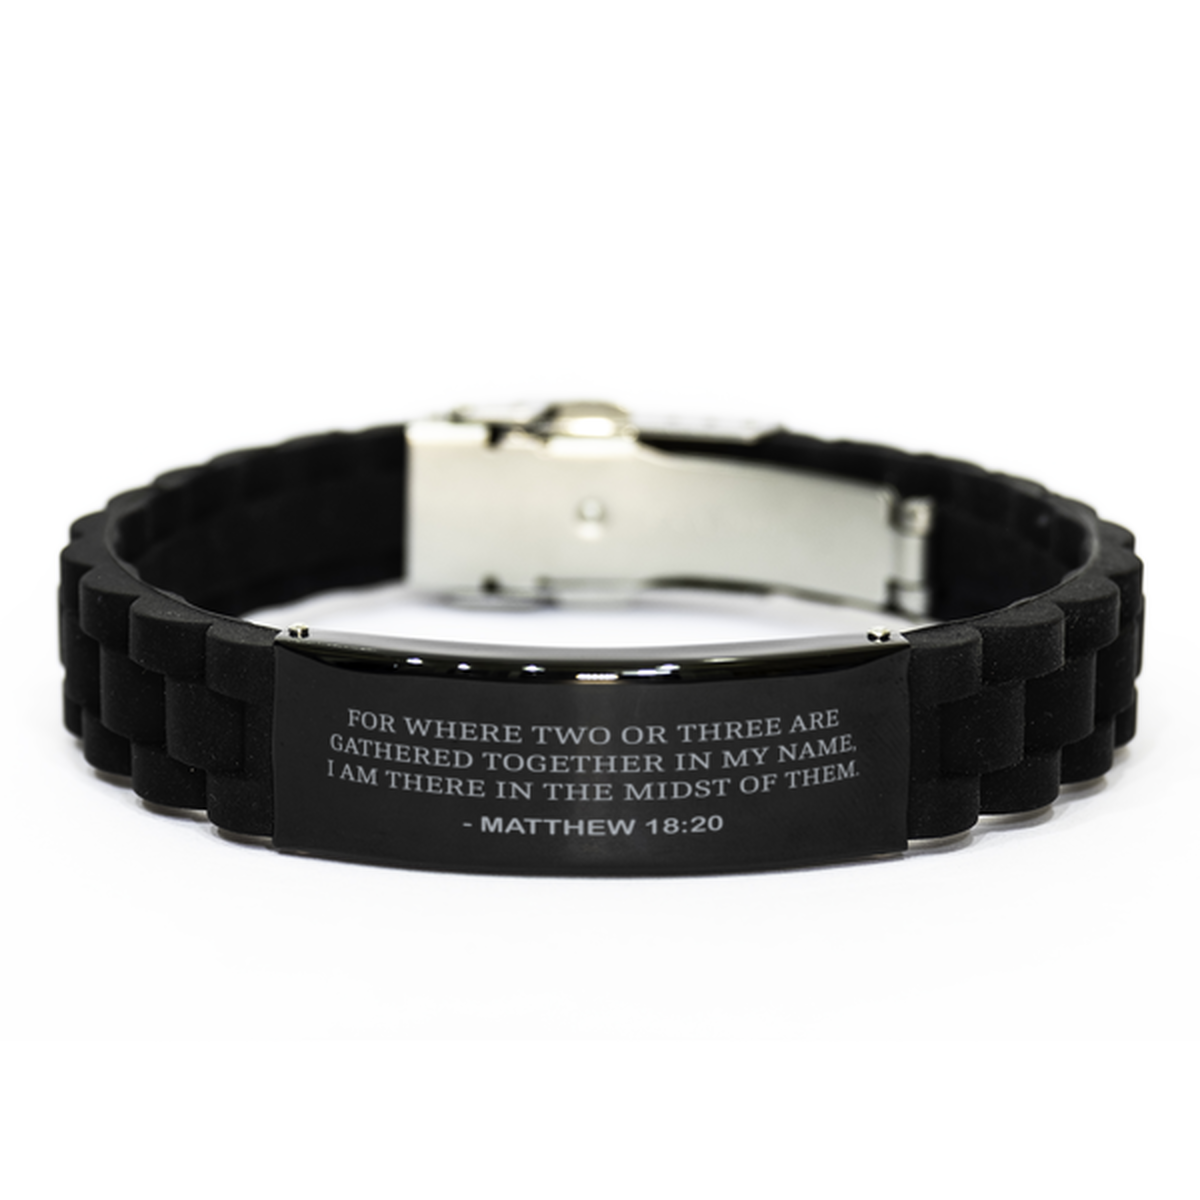 Bible Verse Black Bracelet,, Matthew 18:20 For Where Two Or Three Are Gathered Together In, Inspirational Christian Gifts For Men Women